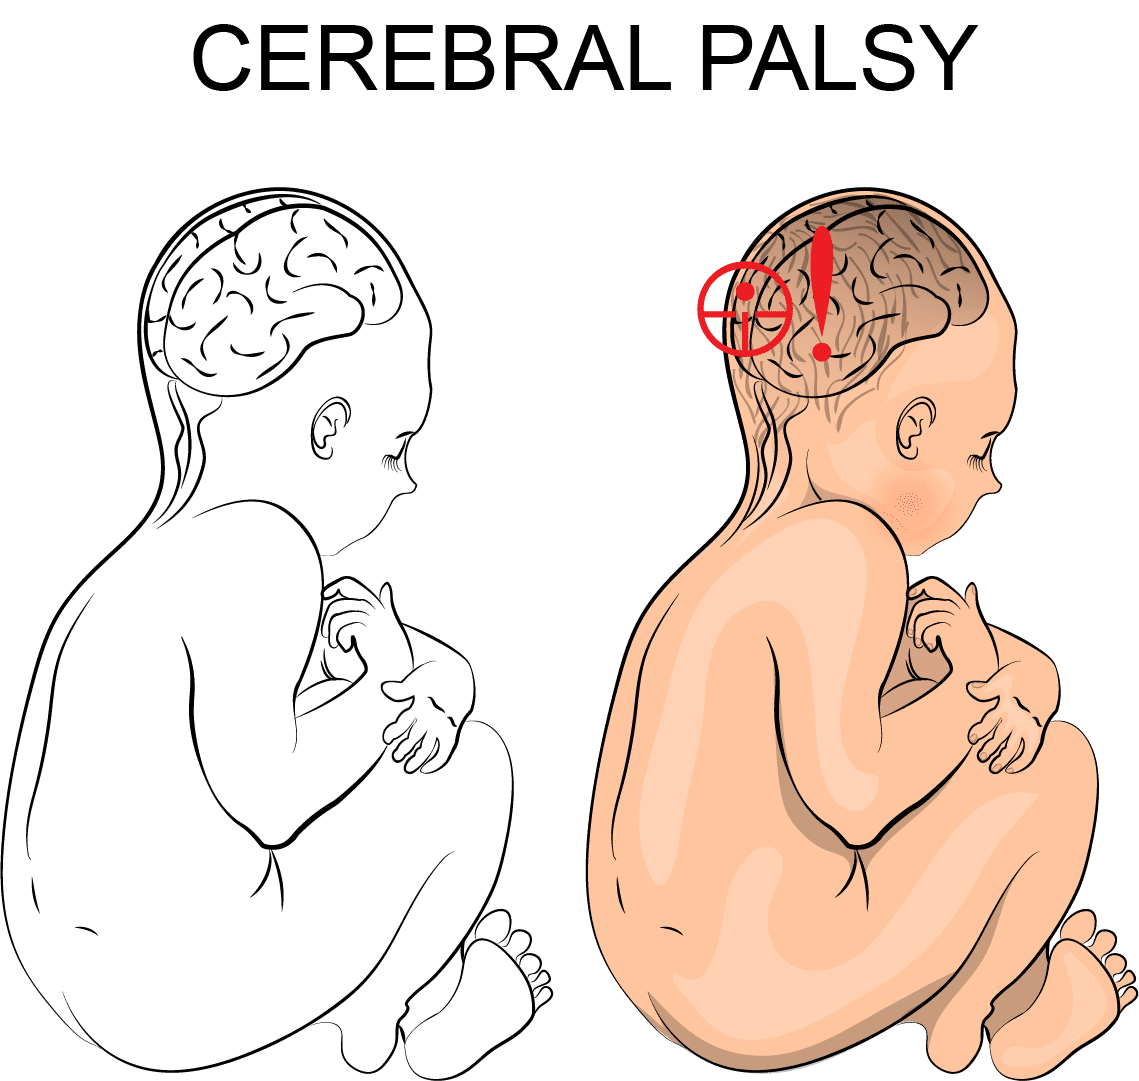 cerebral palsy; neonatal brain damage; CP; birth injury; disability; special needs